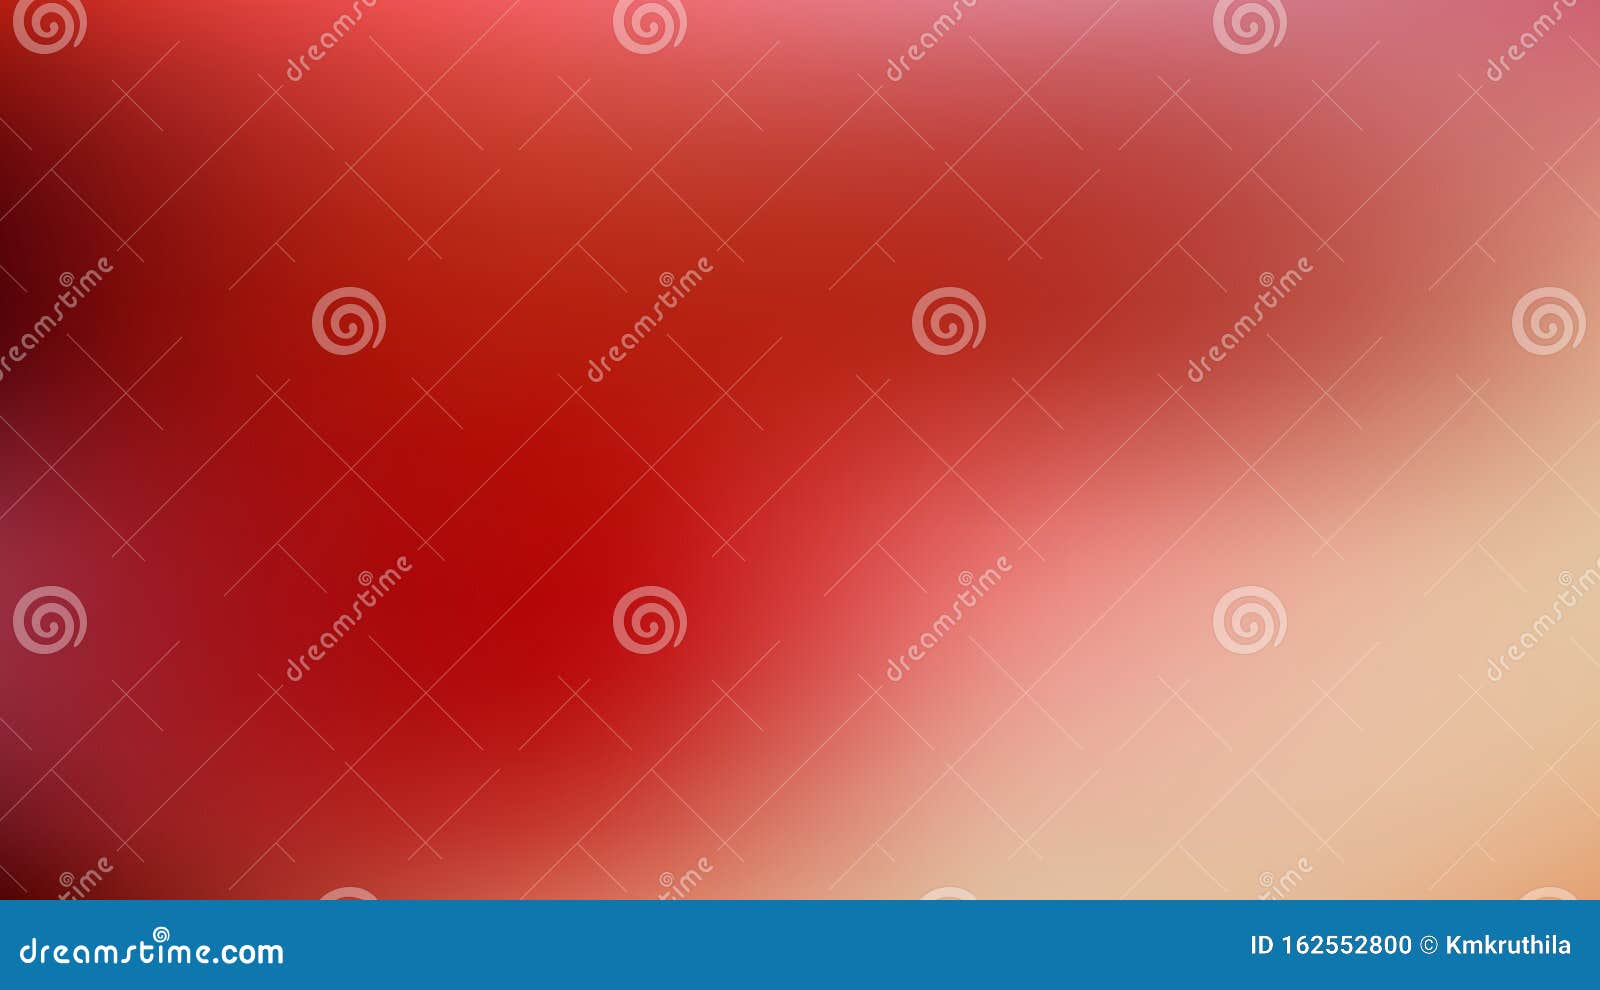 Beige and Red PowerPoint Slide Background Stock Vector - Illustration of  professional, plain: 162552800